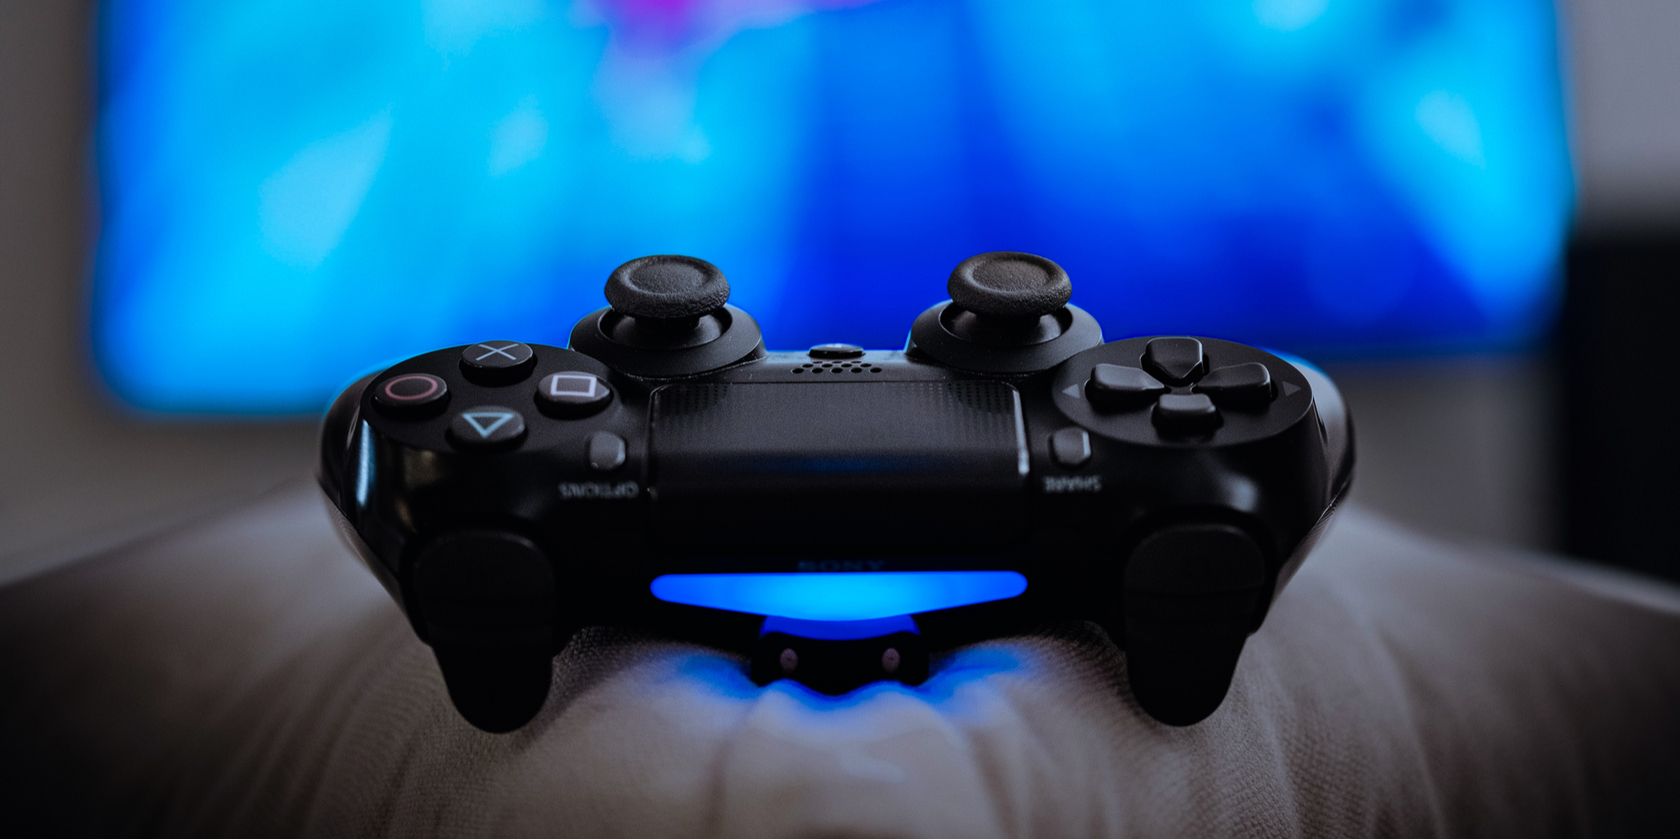 PS4 controller on pillow in front of a TV